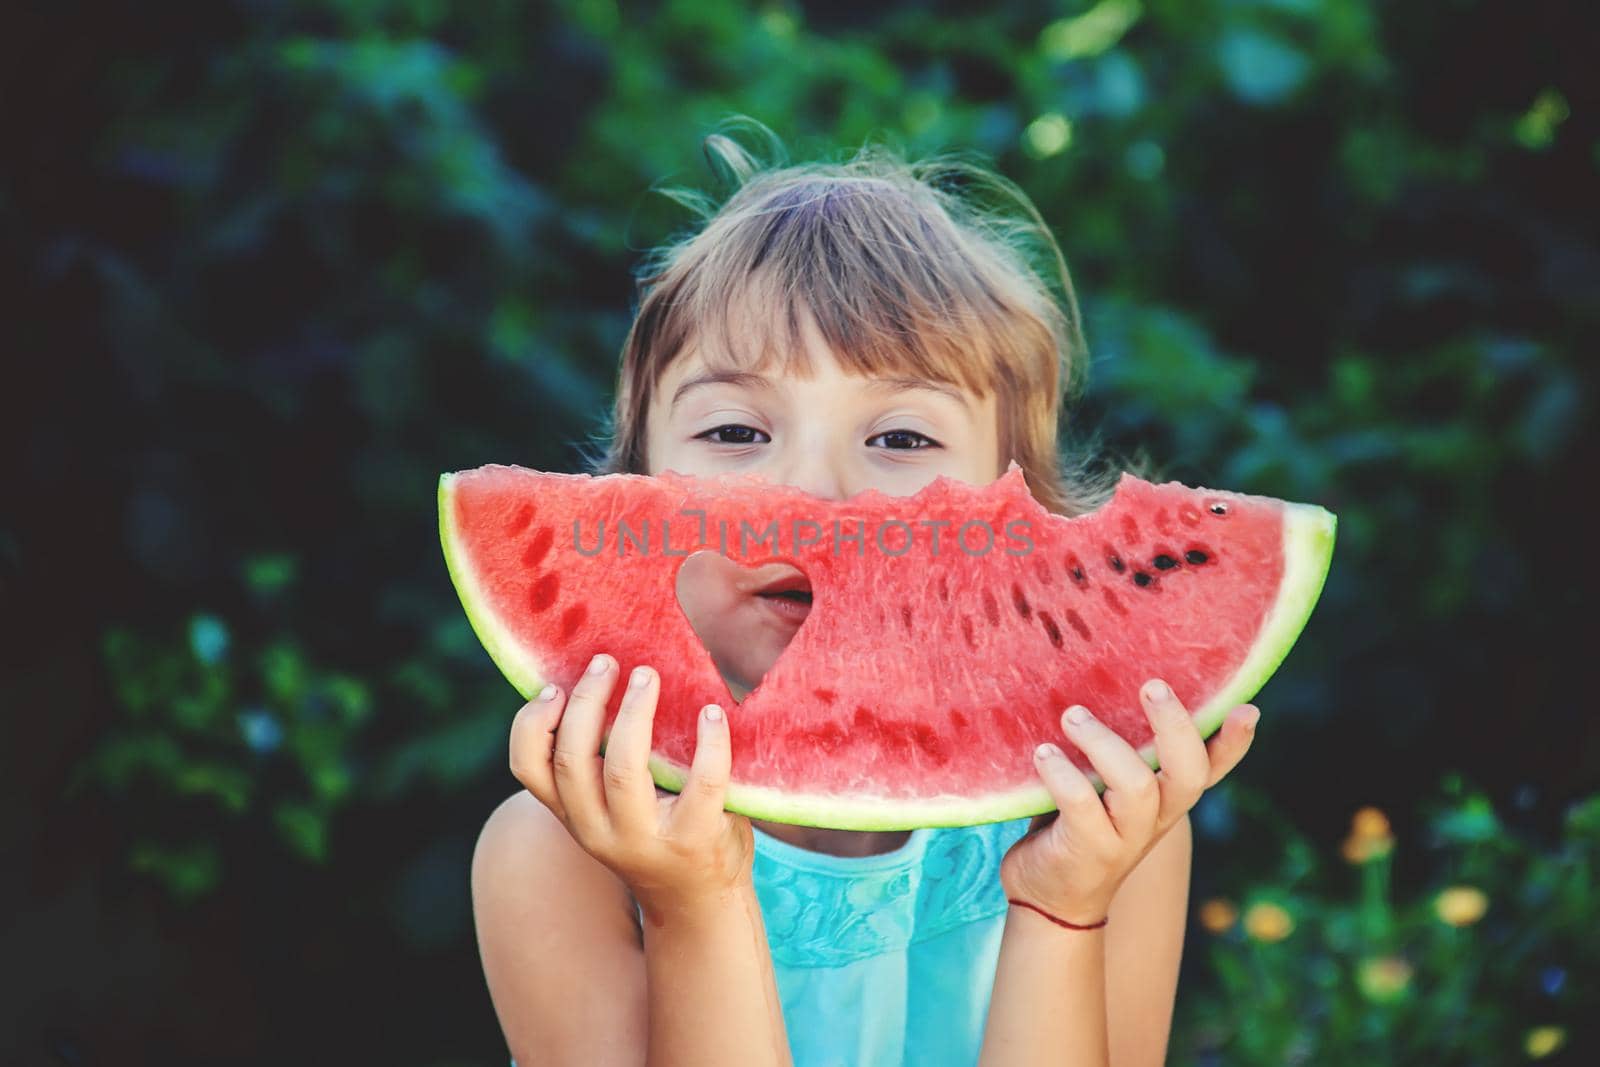 The child eats watermelon in summer. Selective focus. People.